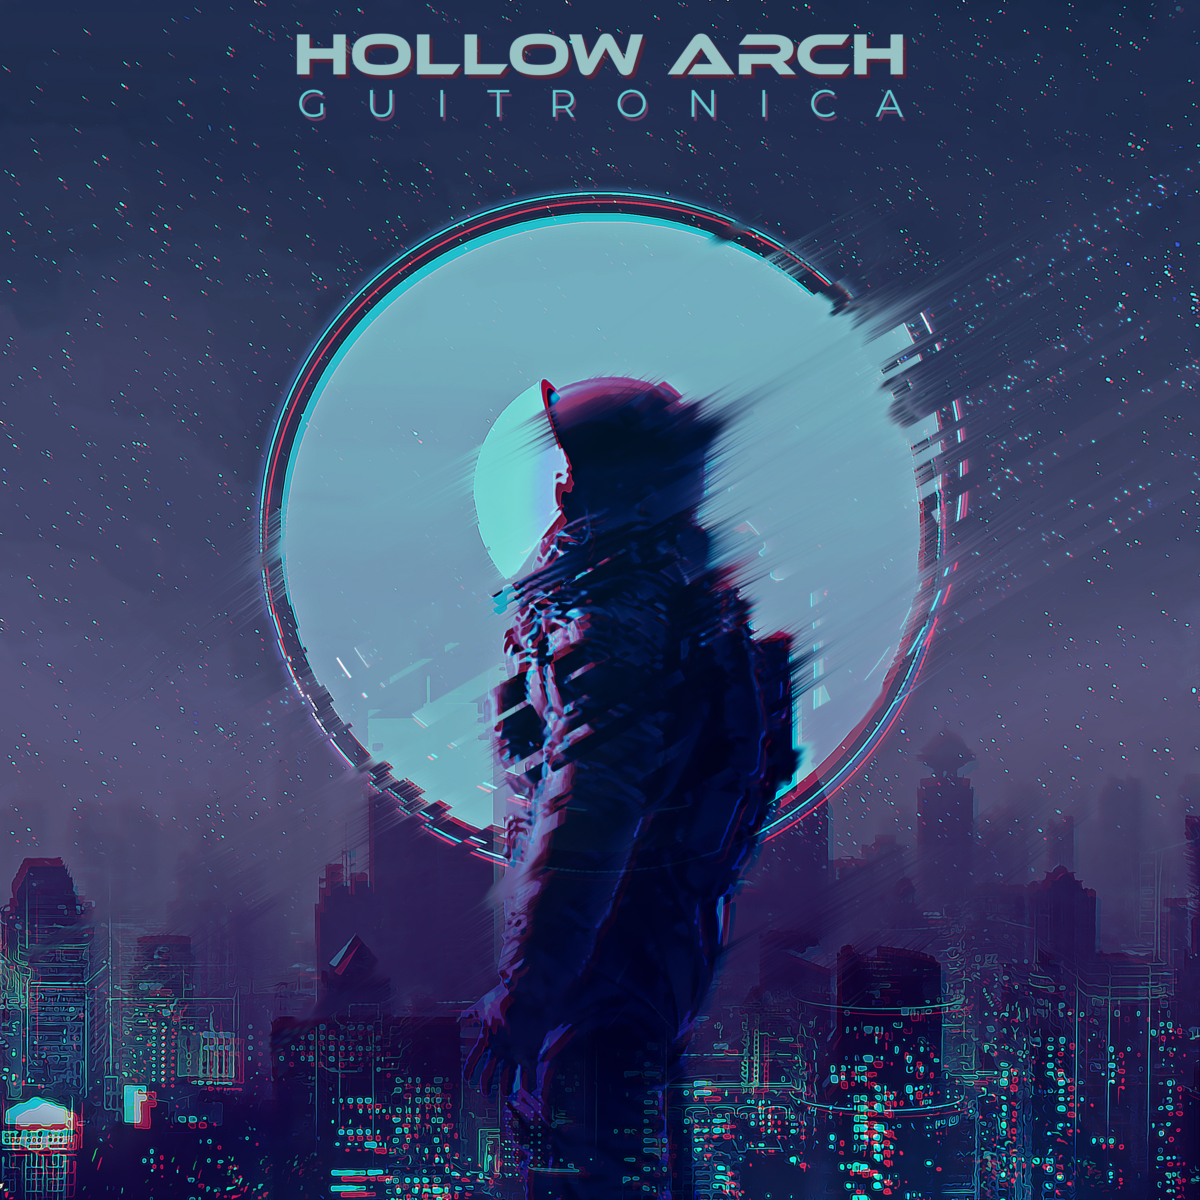 Hollow Arch "Guitronica" artwork